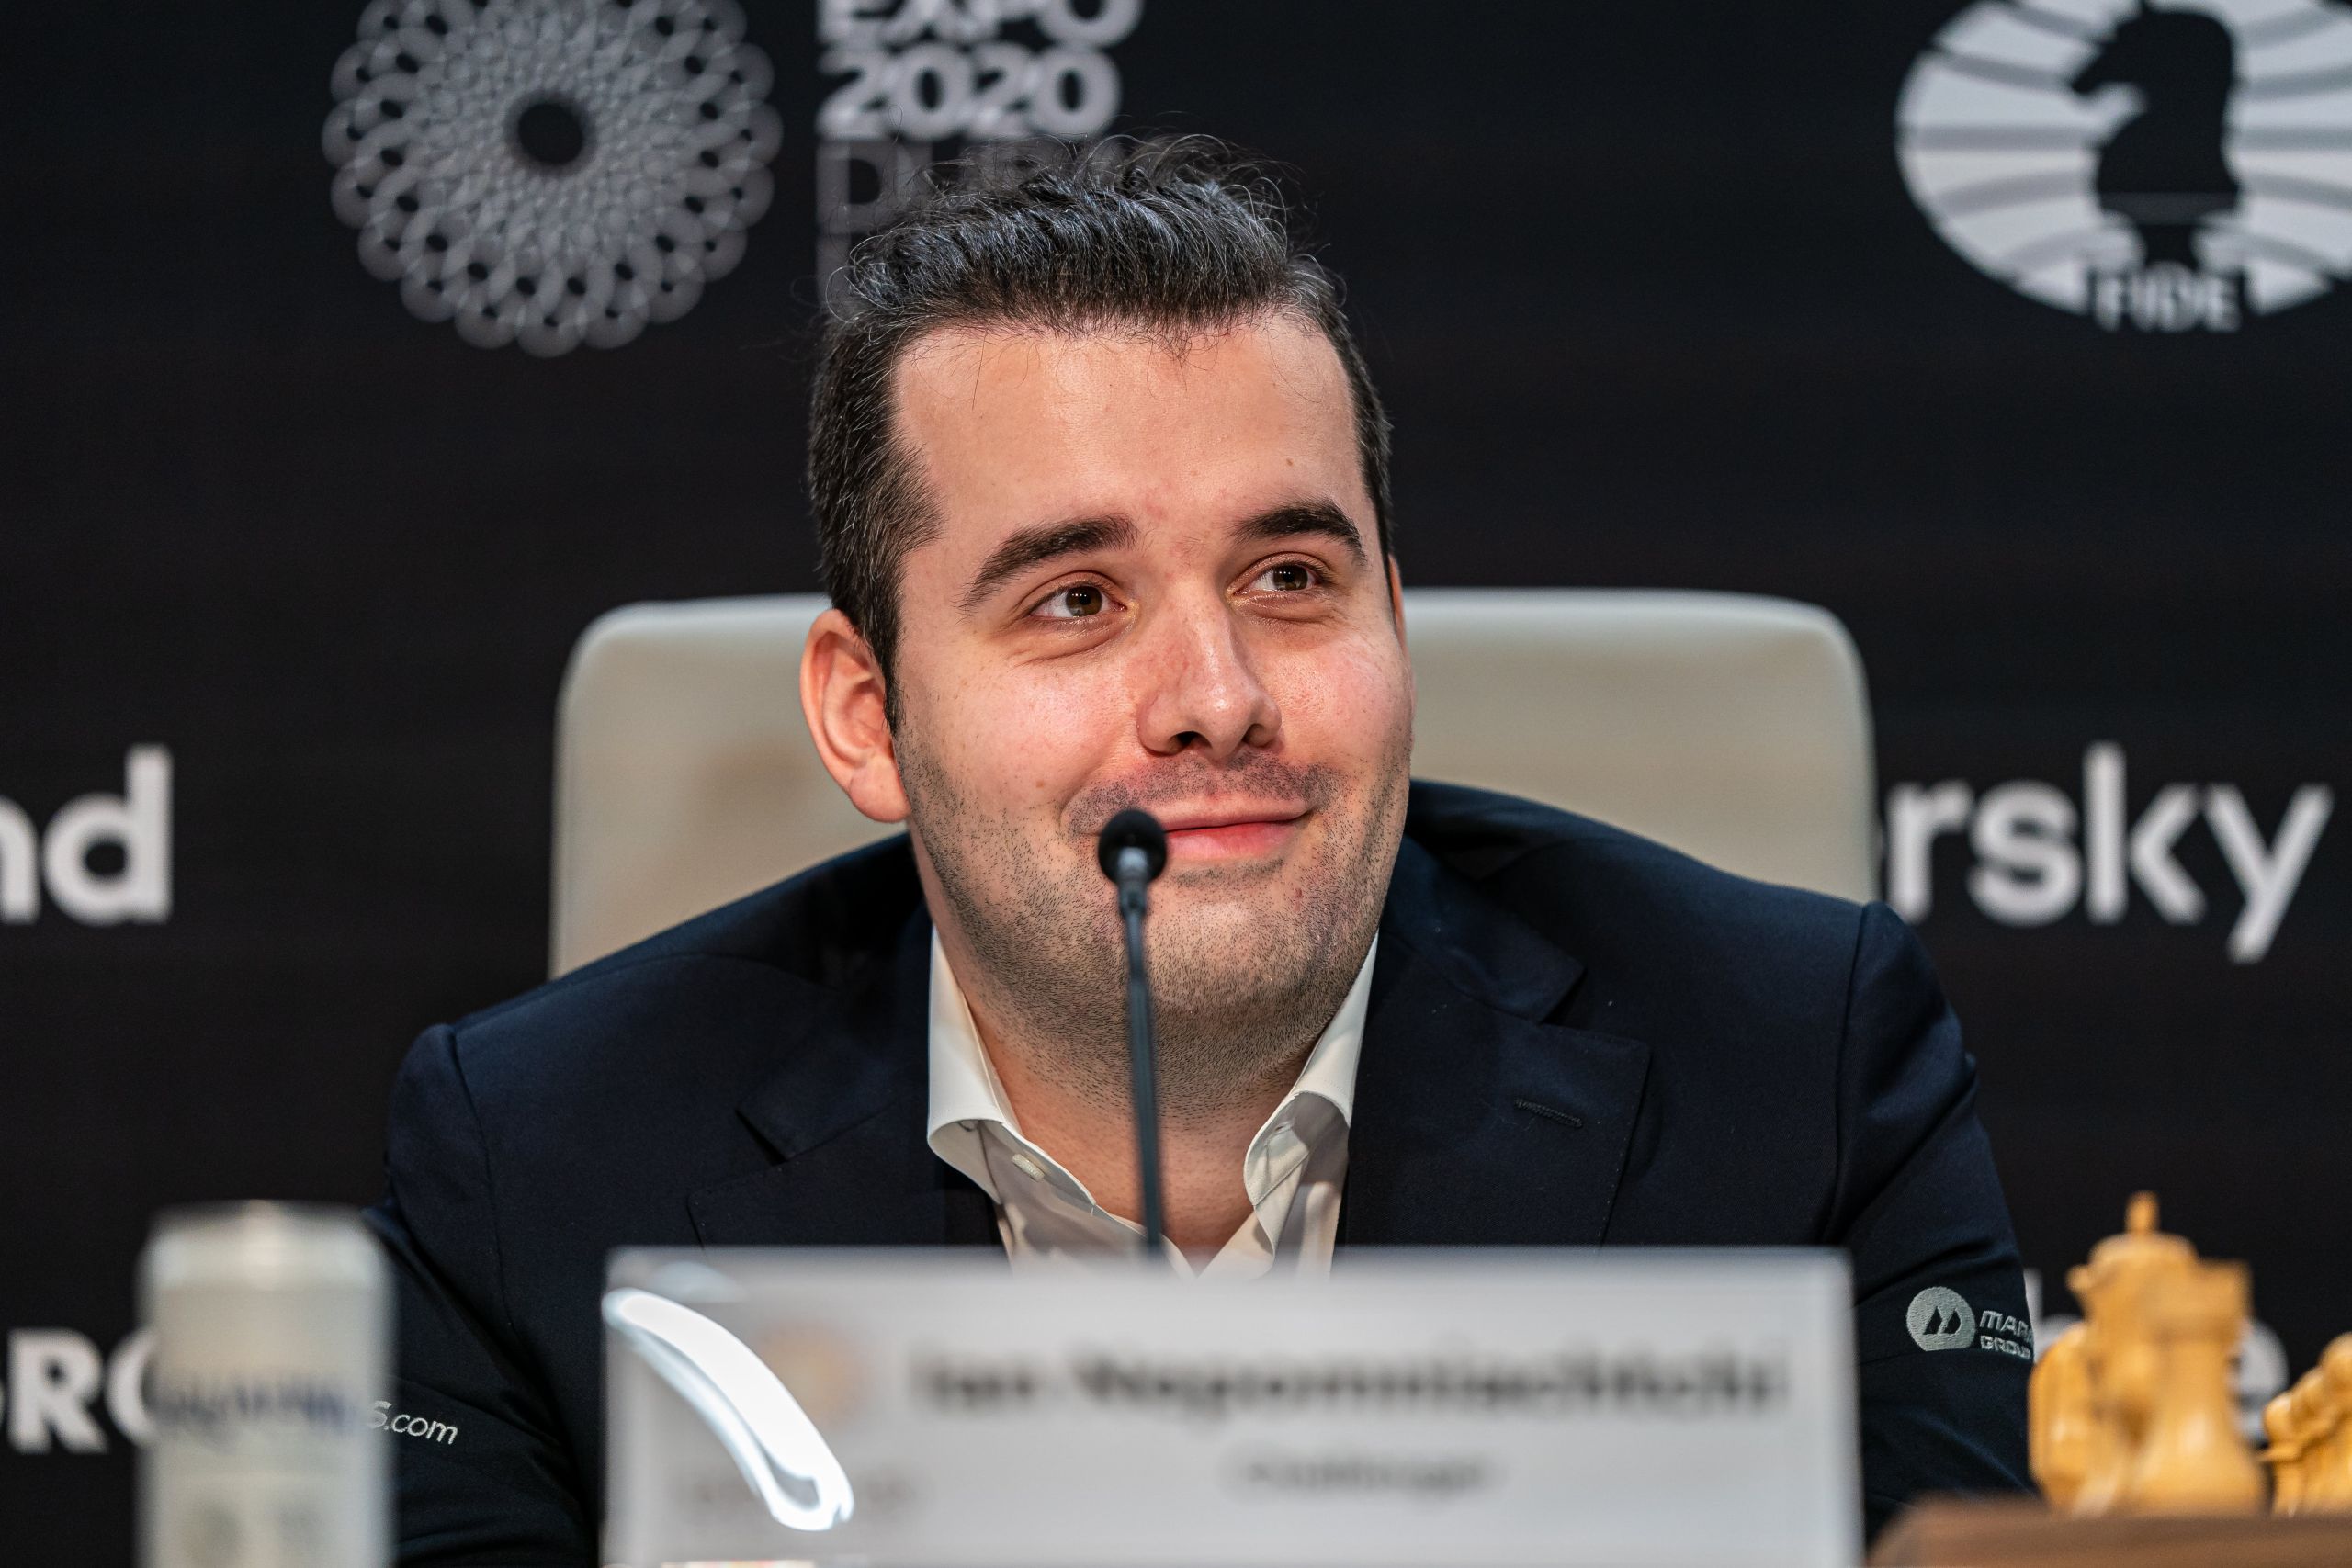 Nepo at career best 4th as FIDE ratings freeze